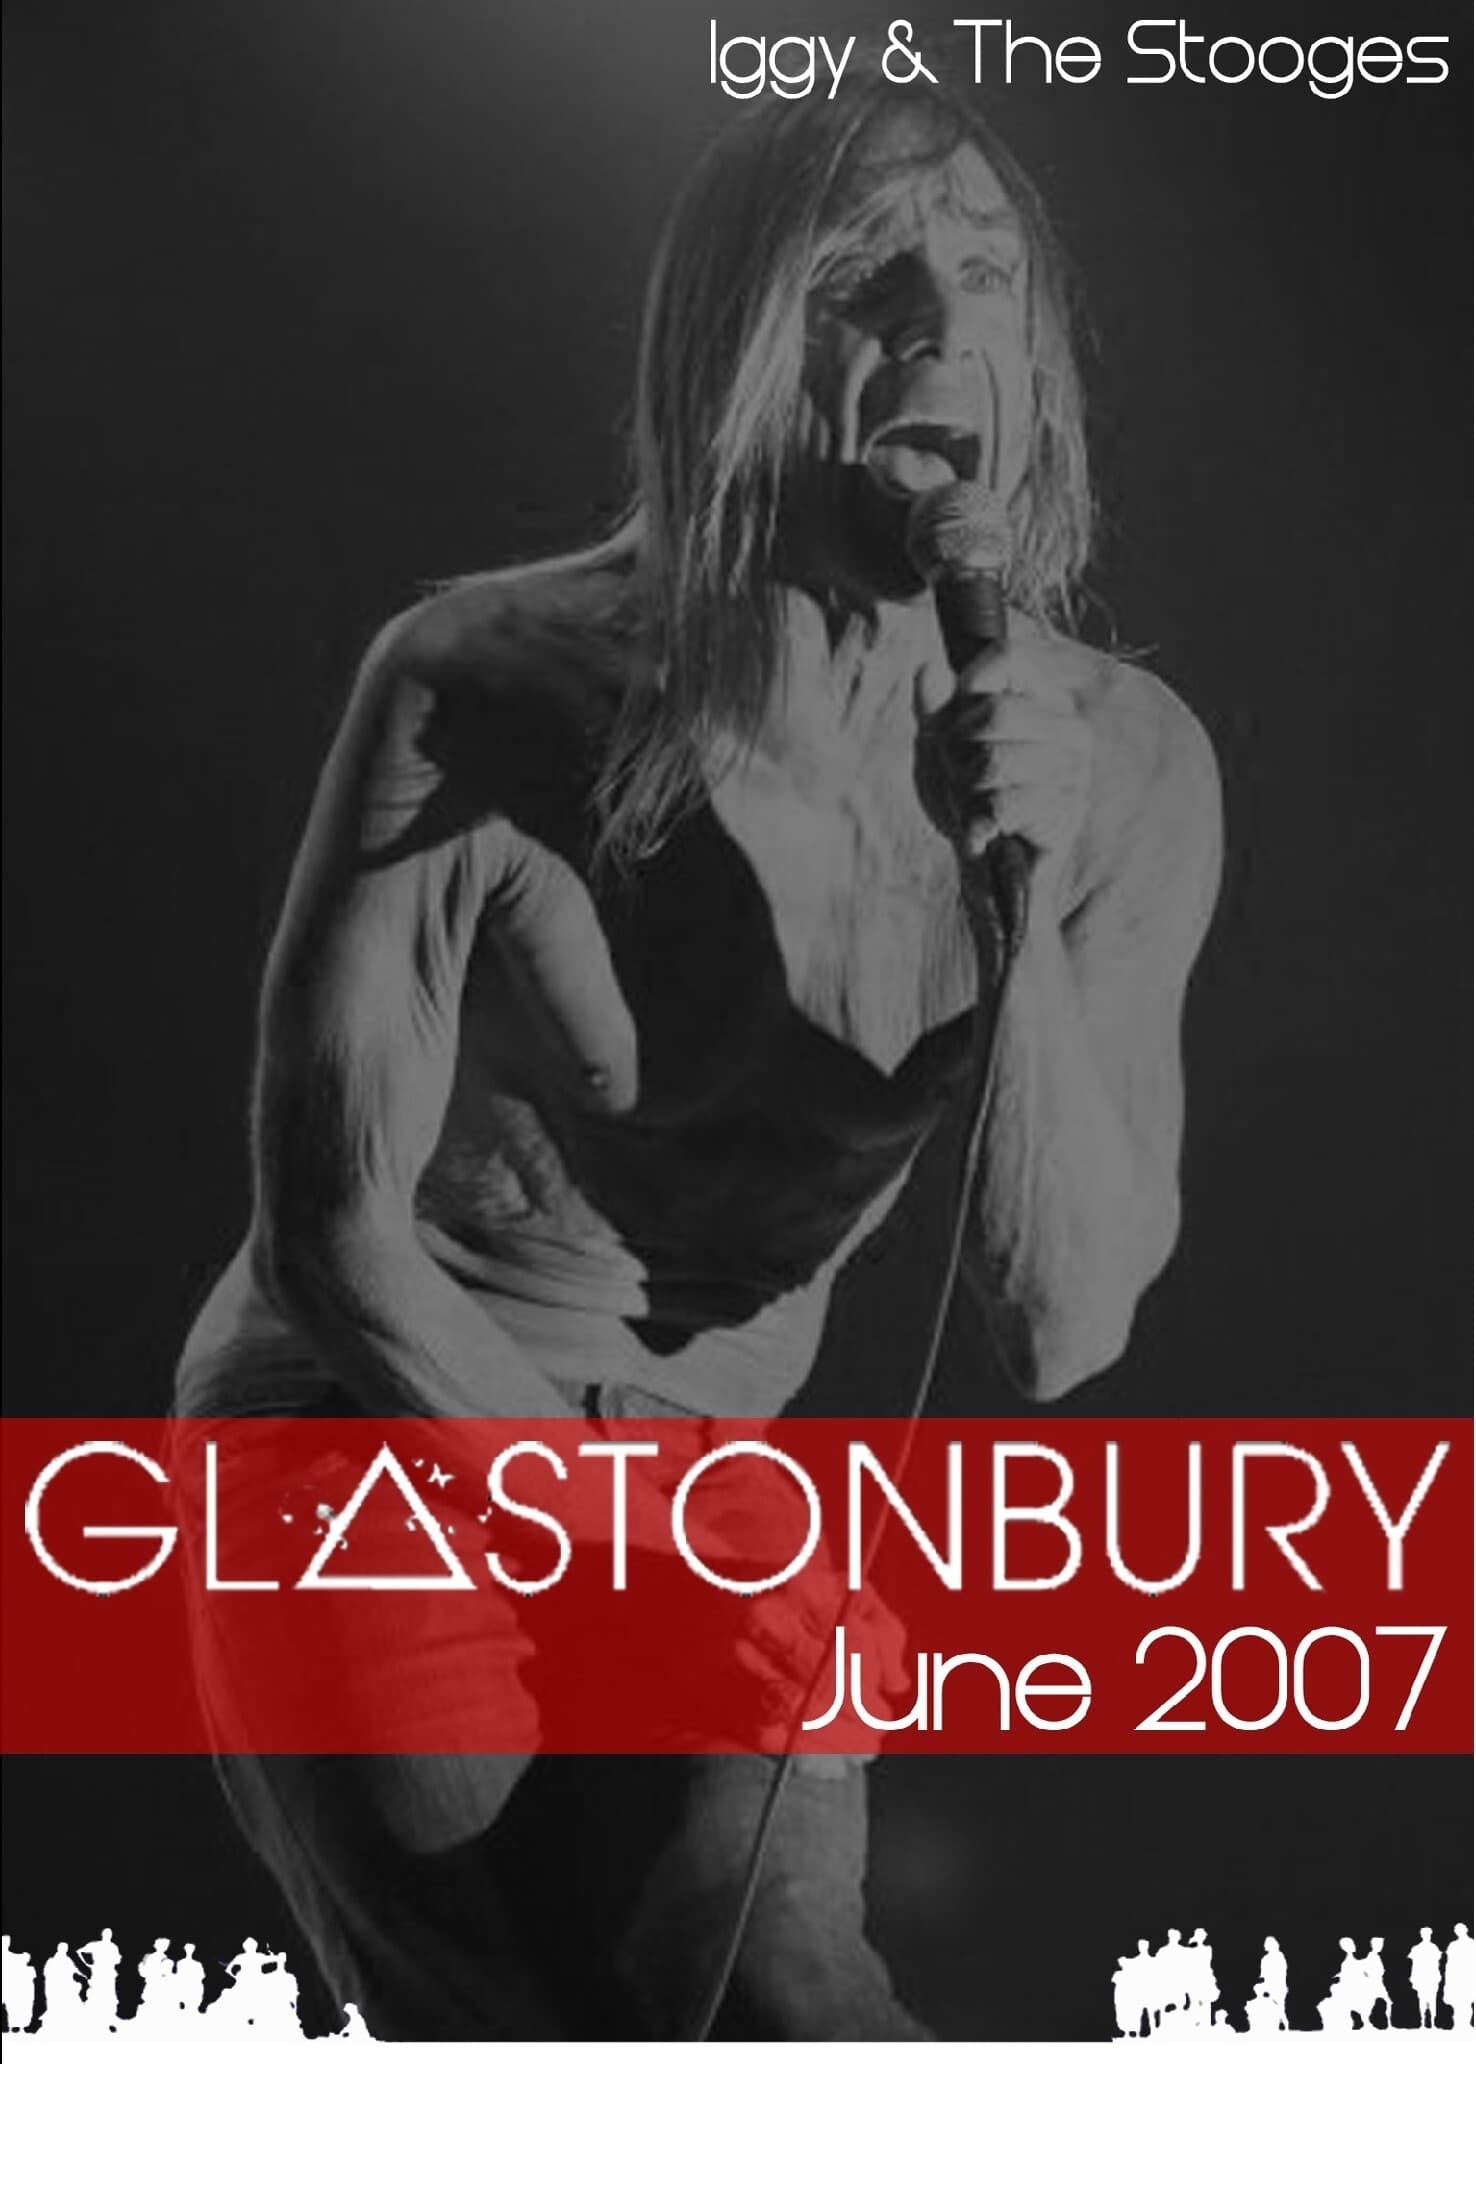 Iggy and The Stooges: Live at Glastonbury